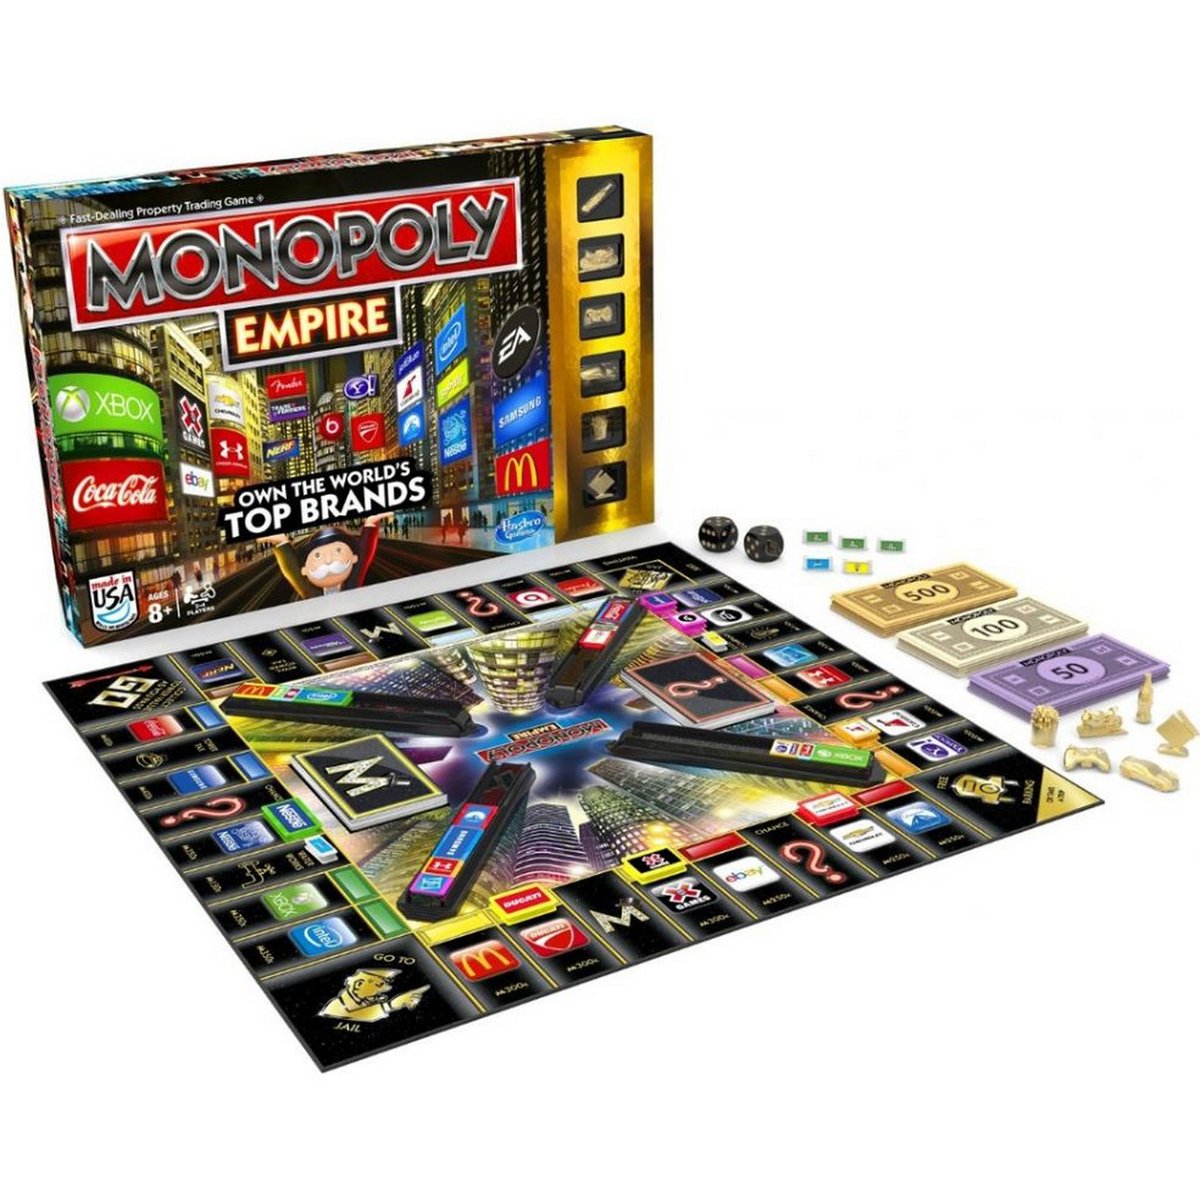 Hasbro Monopoly Empire Game Multicolor A4770 Online at Best Price ...